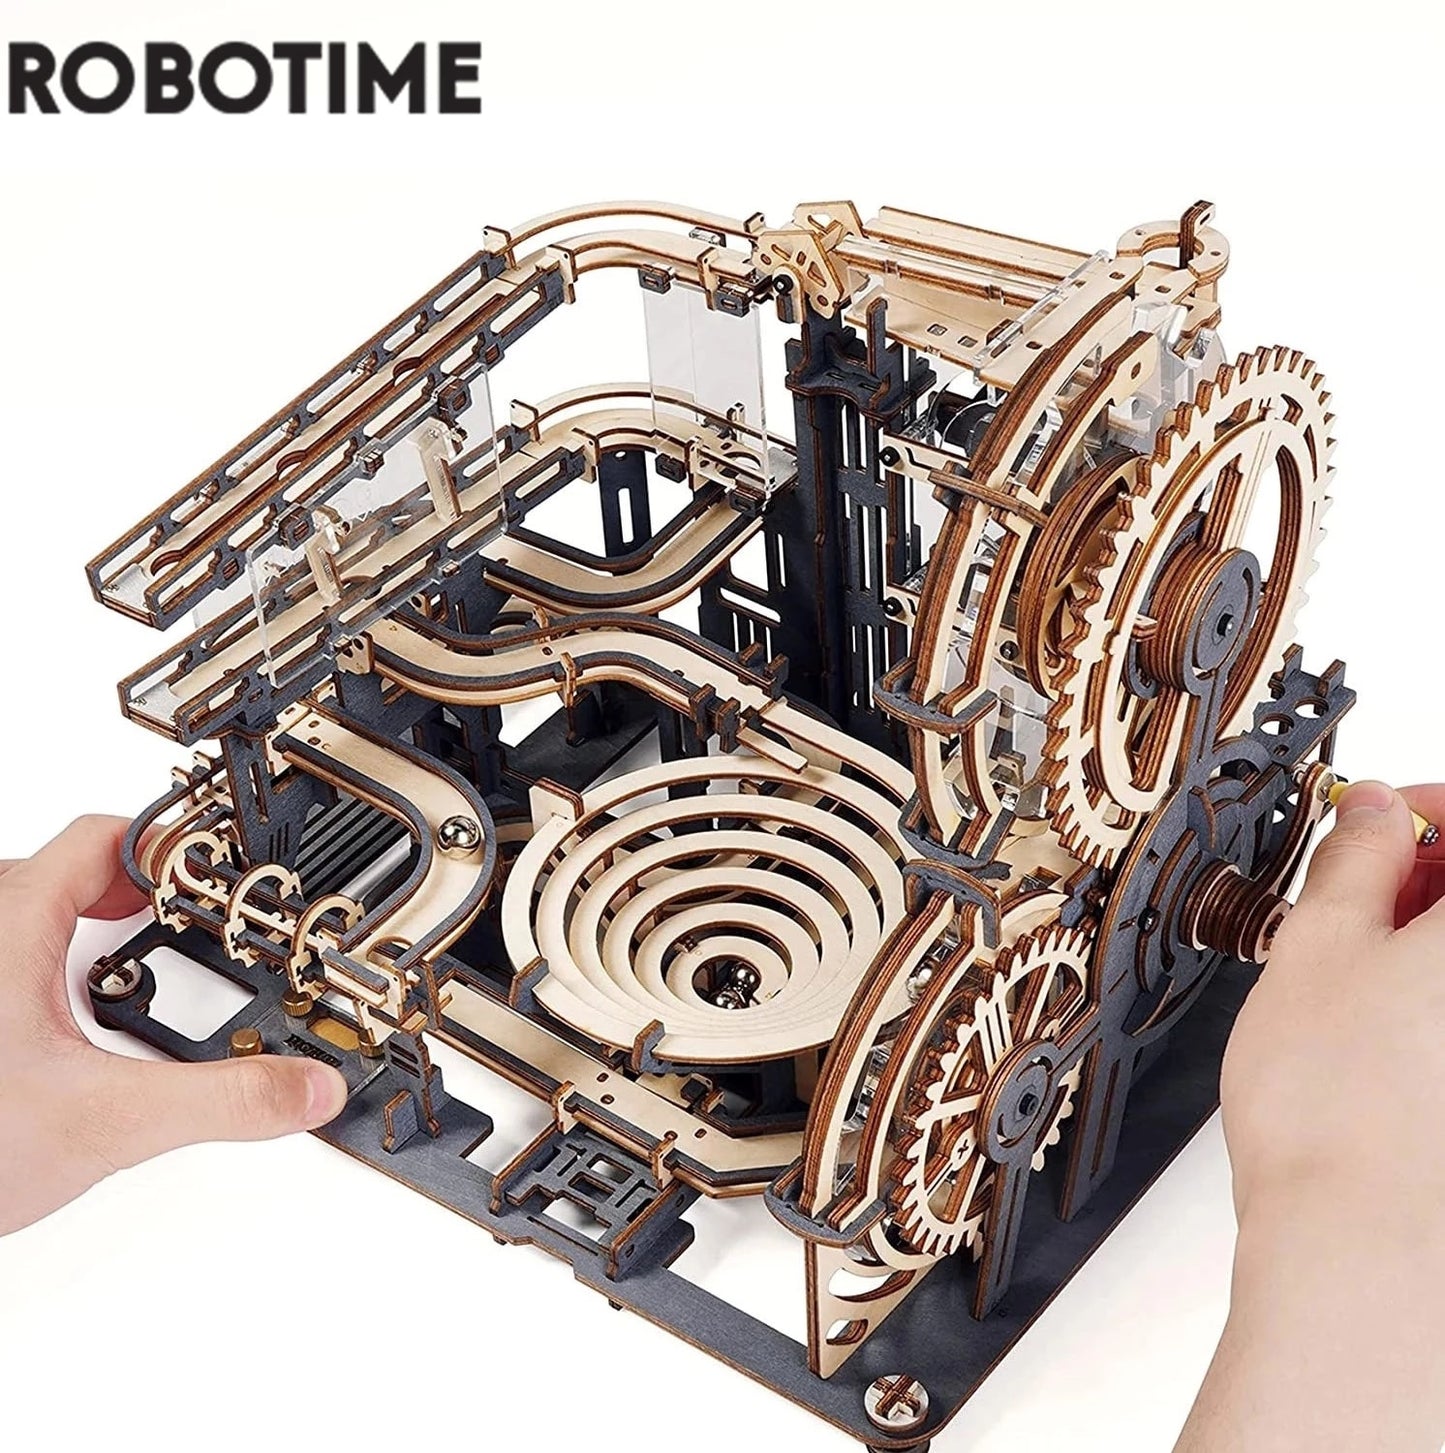 Robotime Rokr Marble Run Set 5 Kinds 3D Wooden Puzzle DIY Model Building Block Kits Assembly Toy Gift for Teens Adult Night City.